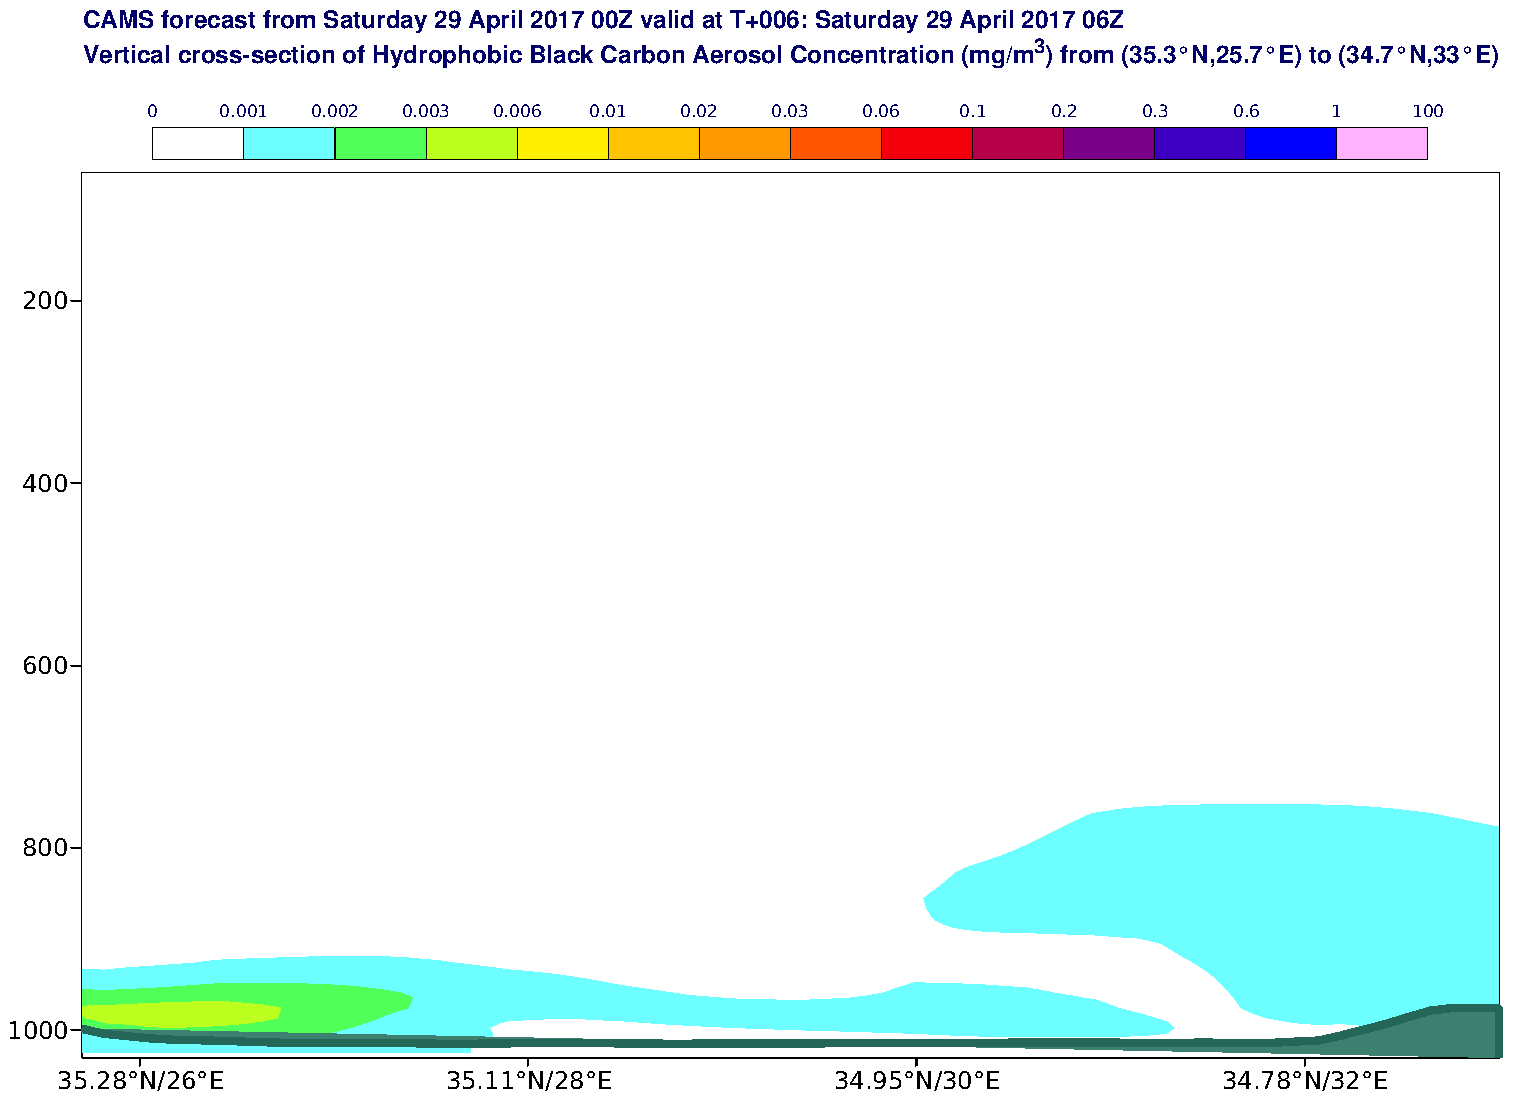 Vertical cross-section of Hydrophobic Black Carbon Aerosol Concentration (mg/m3) valid at T6 - 2017-04-29 06:00